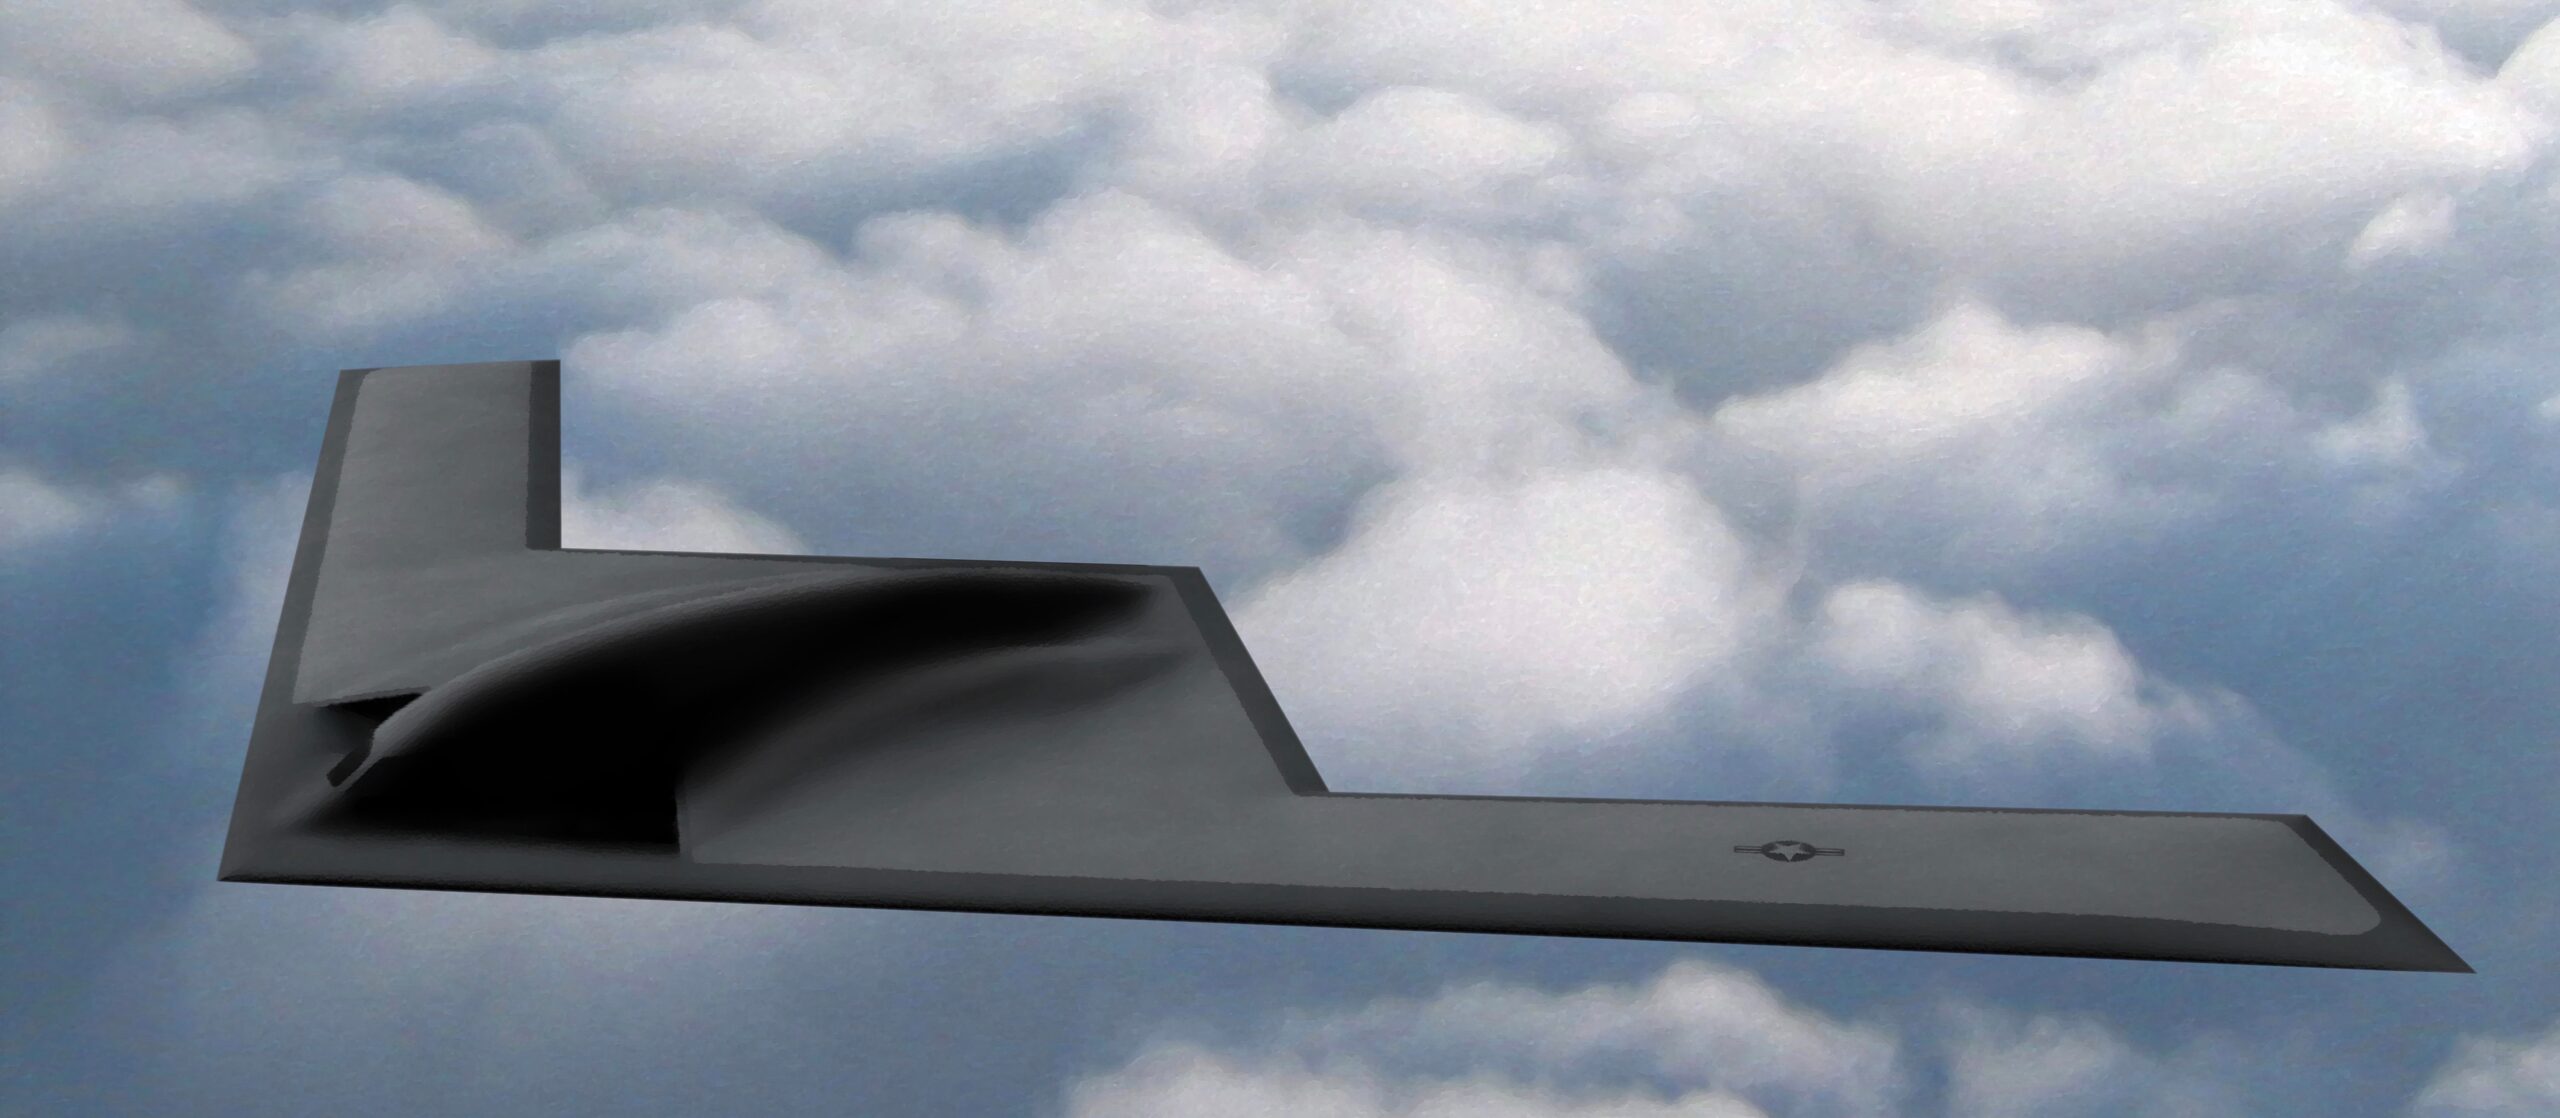 B-21 First Flight In 2021 Not Likely